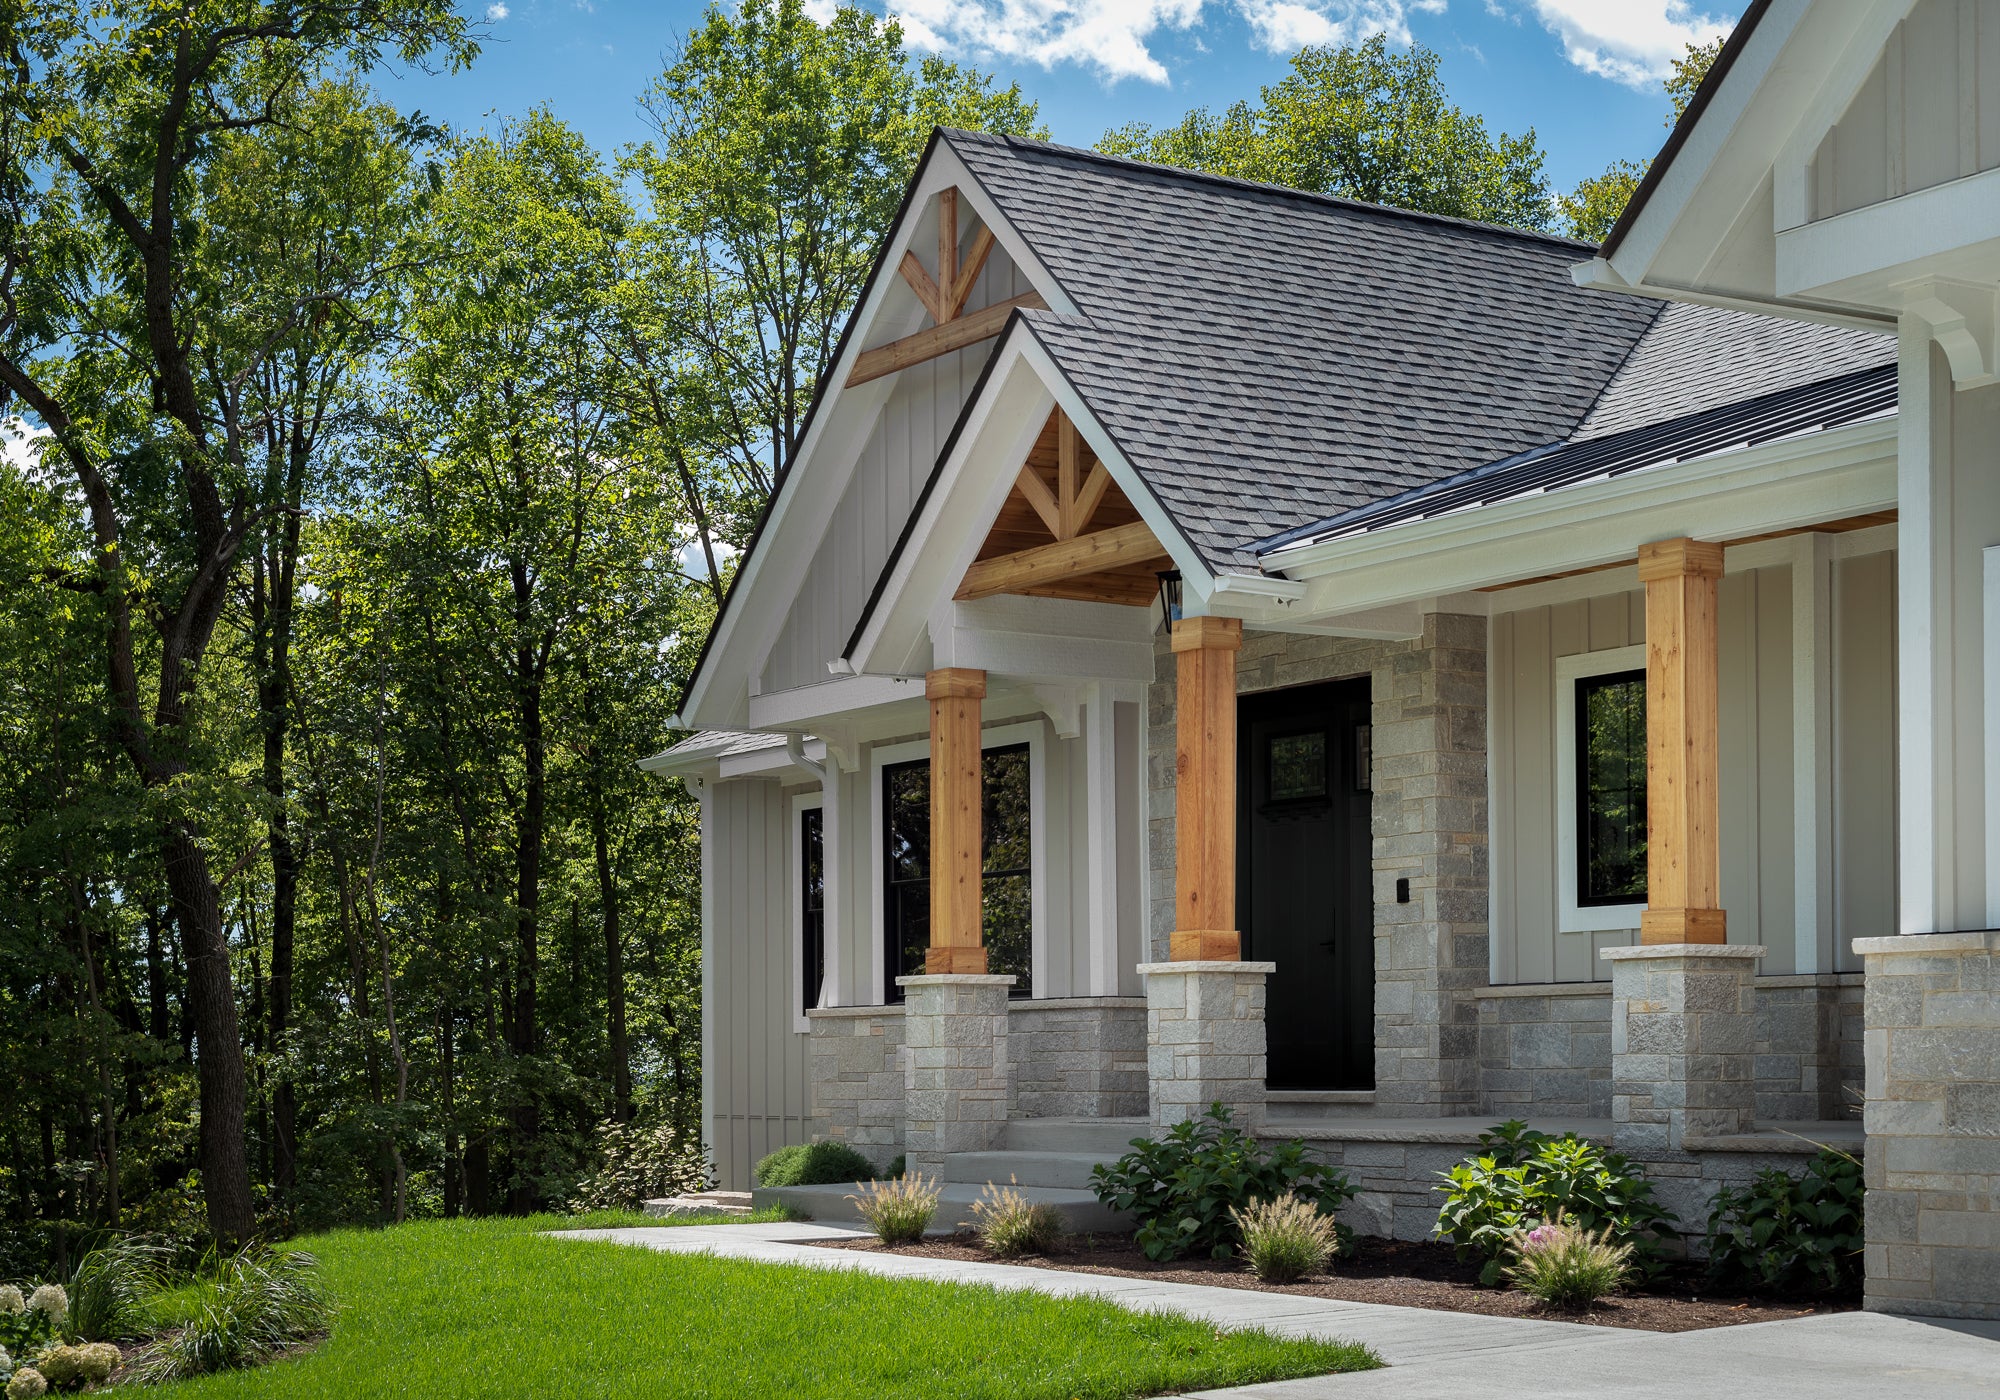 Why Build with a Homebuilder vs. Doing it Yourself?